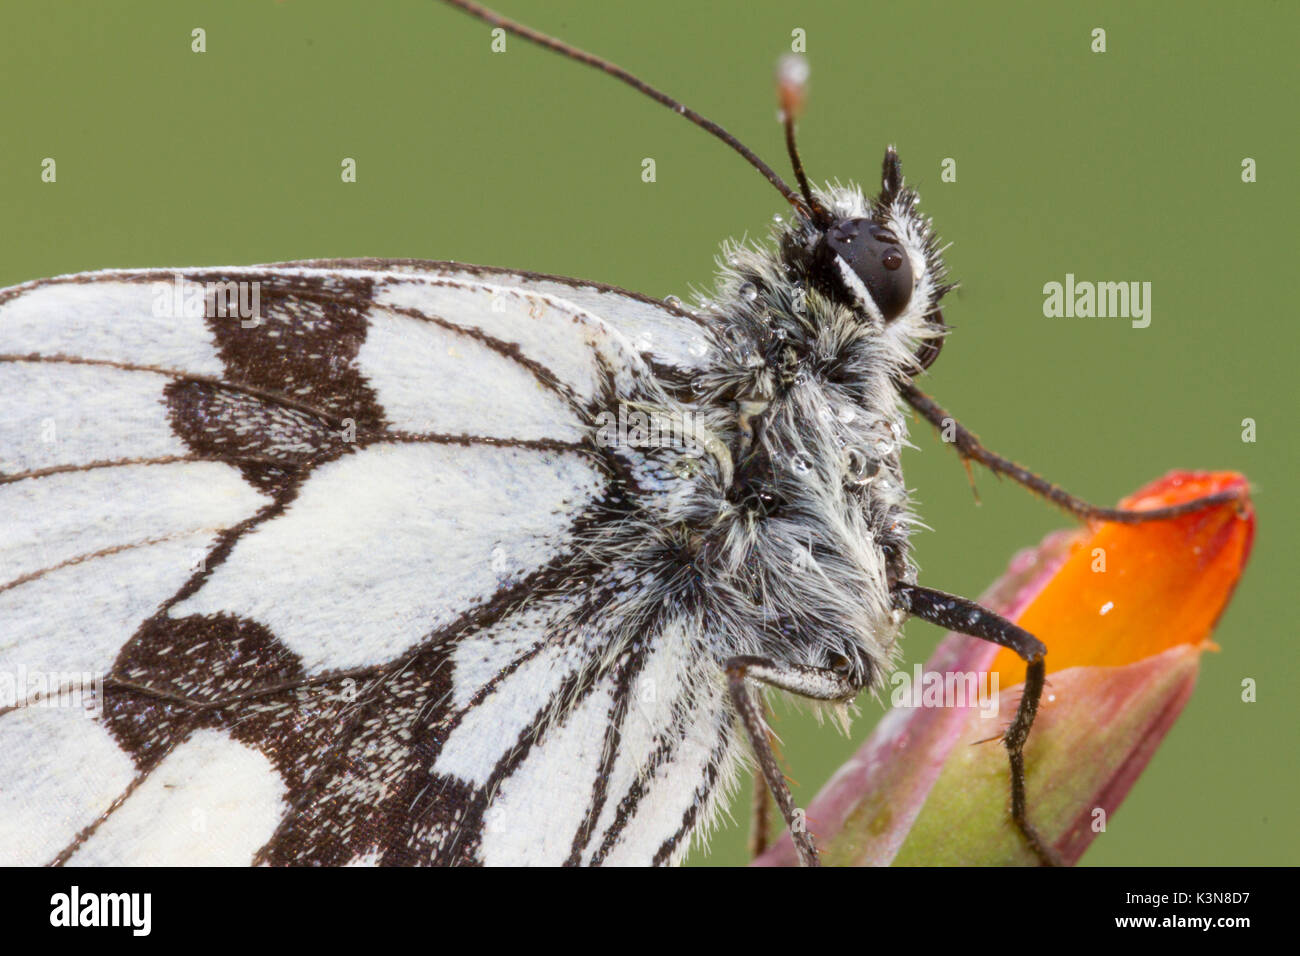 Macro with Details of body and wings of Marbled white butterfly or Melanargia galathea. Lombardy, Italy Stock Photo